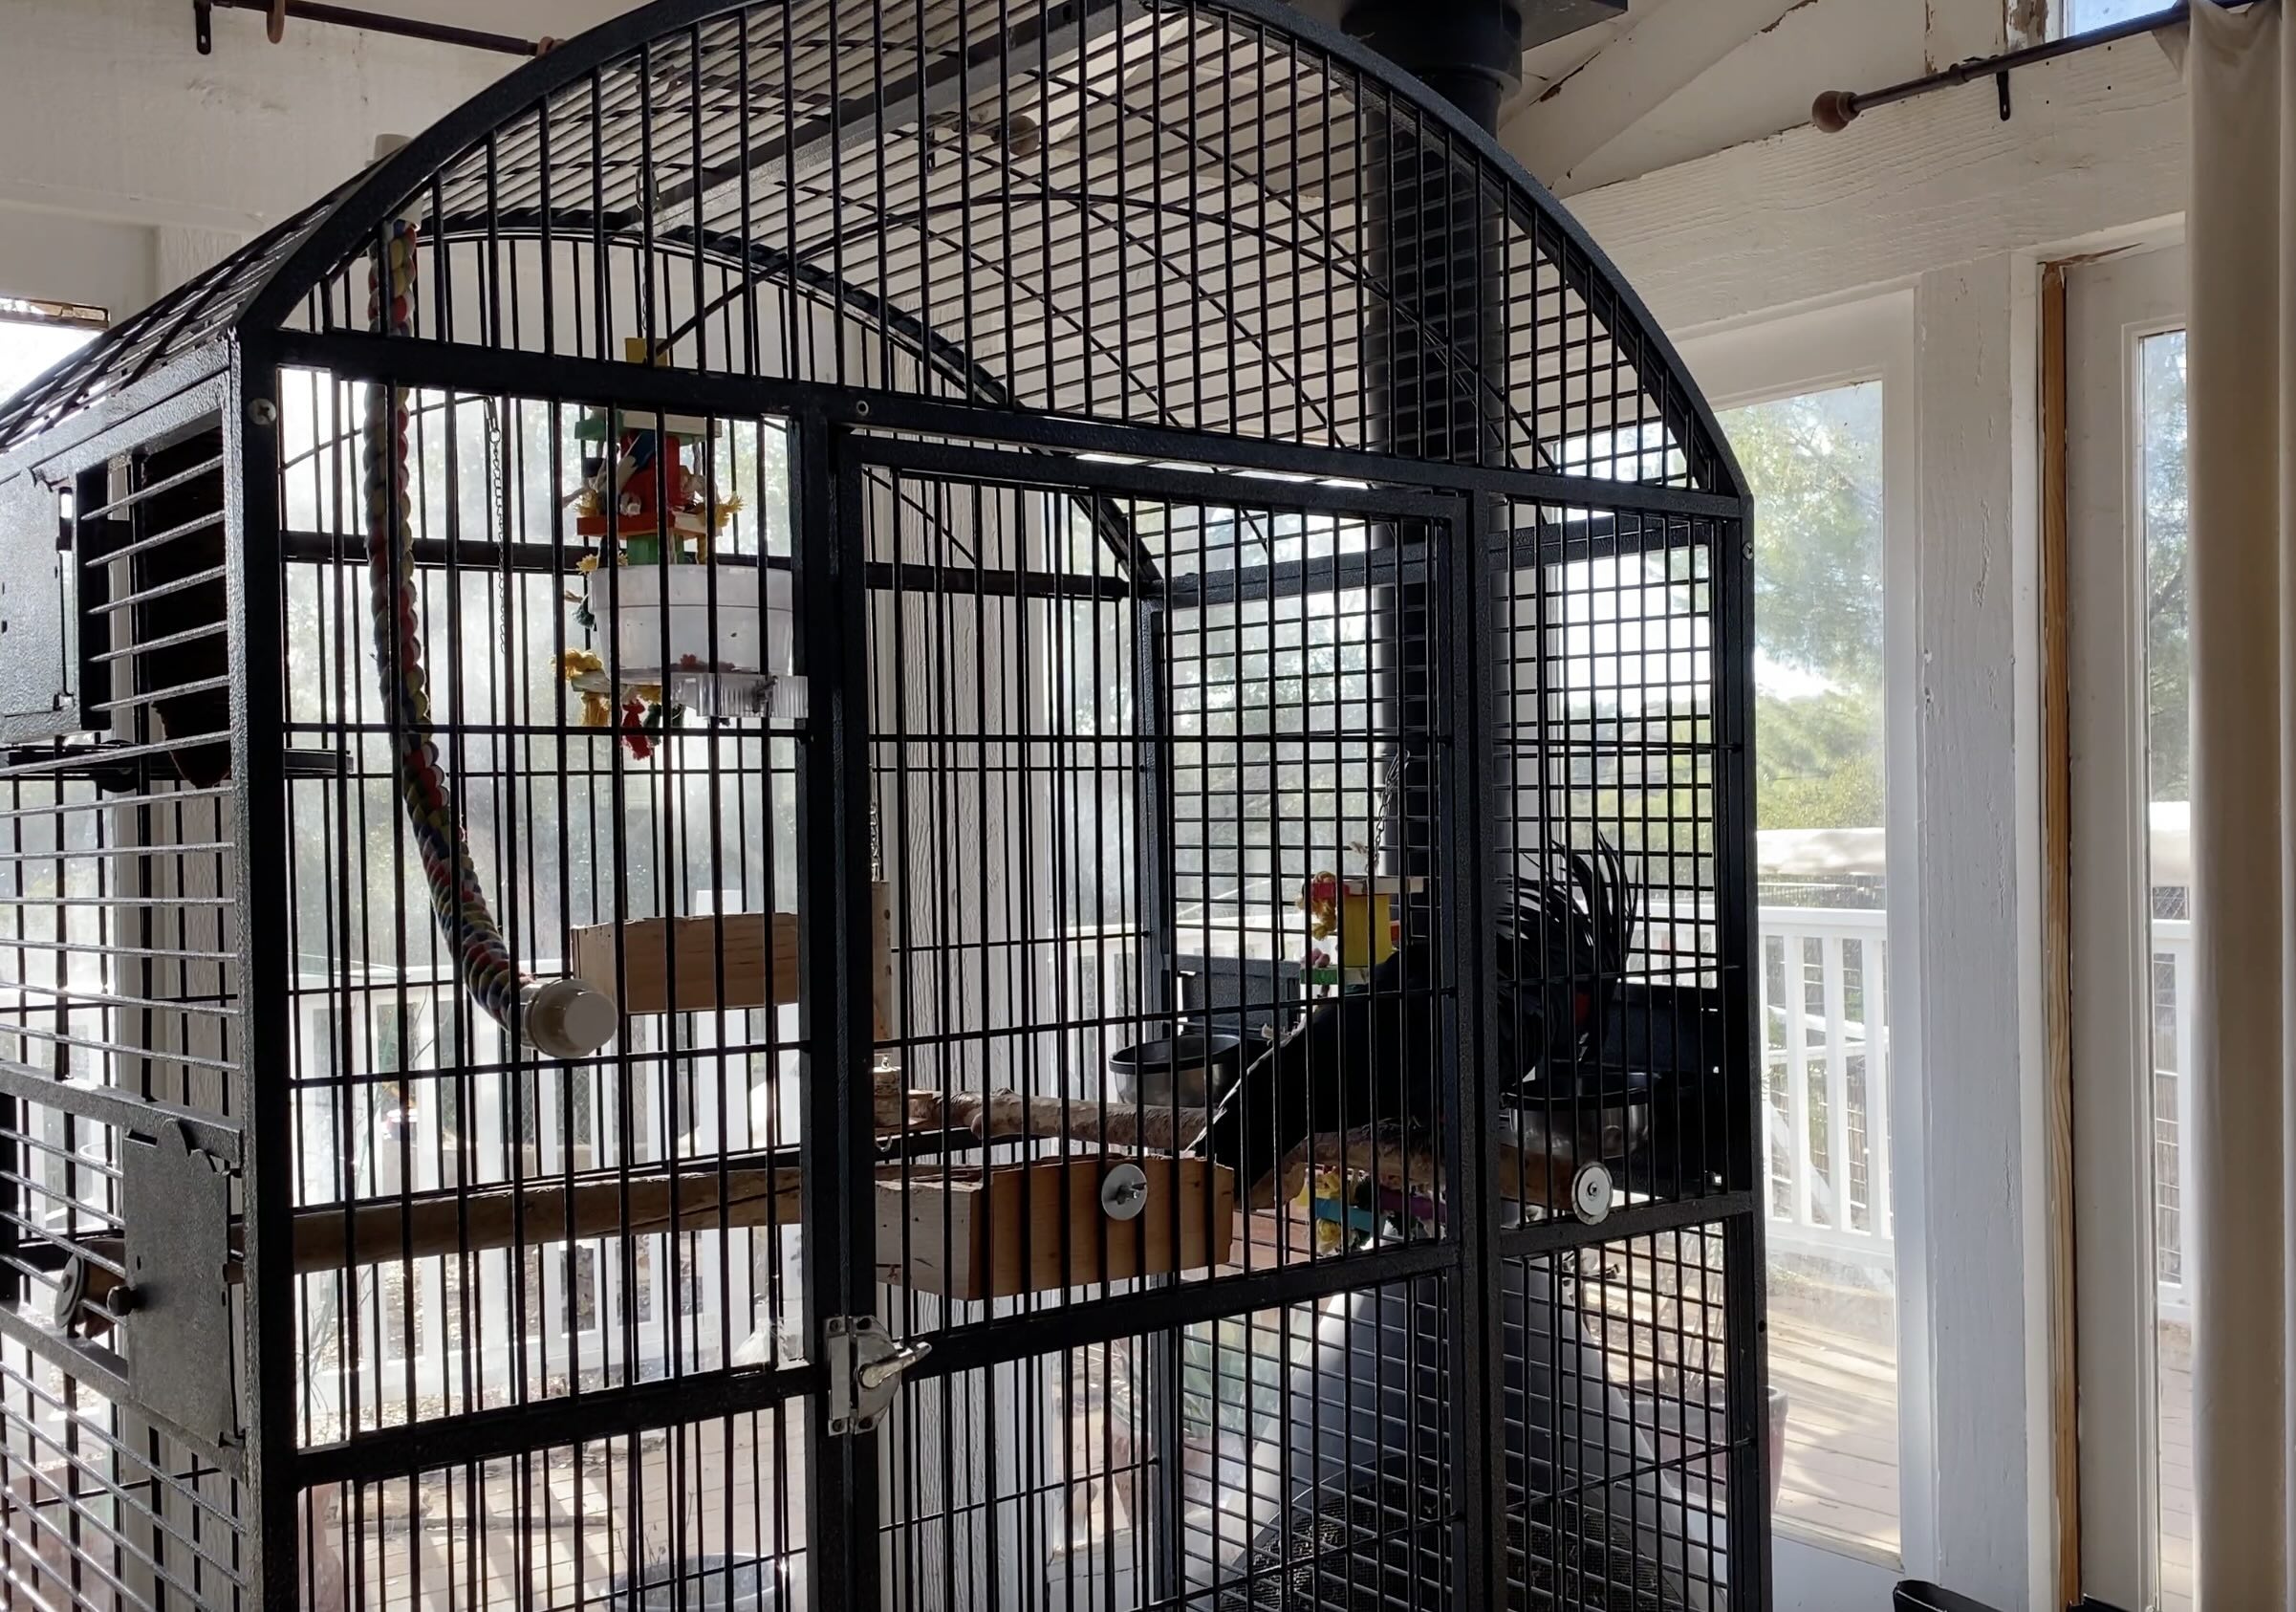 Parrot cage